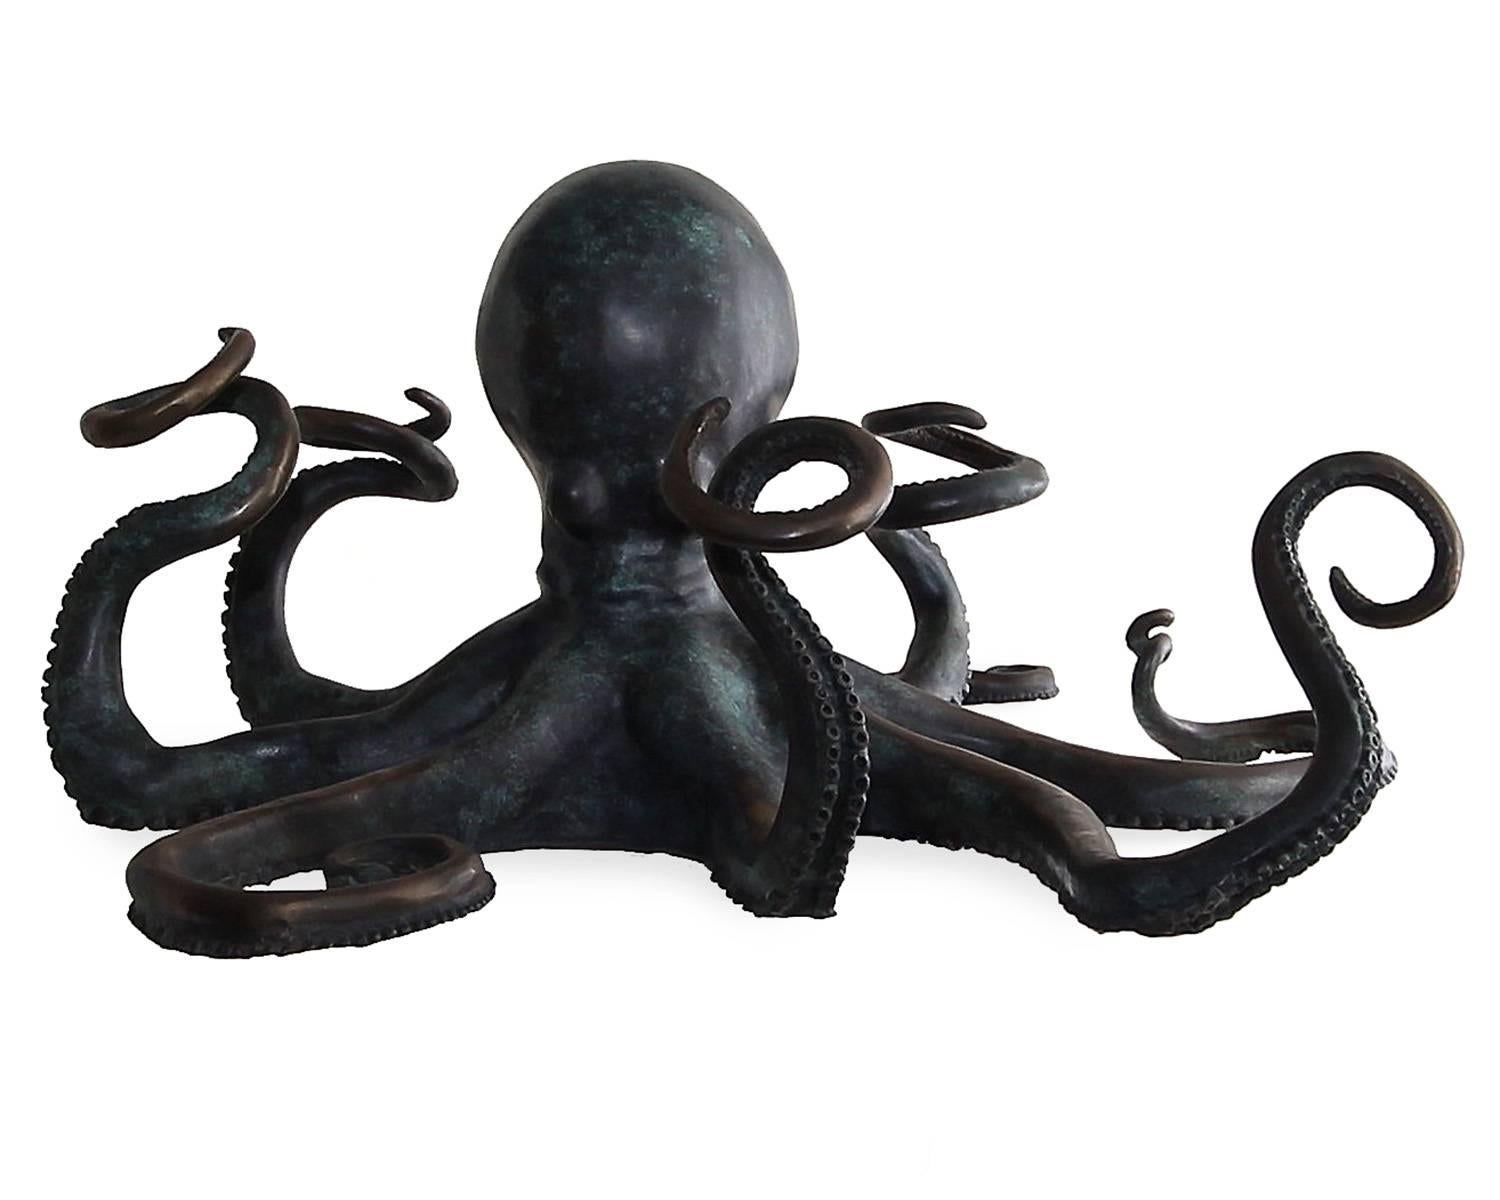 Oversize Maitland-Smith bronze sculpture of an octopus that also serves as a wine bottle holder. The piece can hold four inverted wine bottles in its arms. These are very rare, since they were only produced for a short time and in very limited